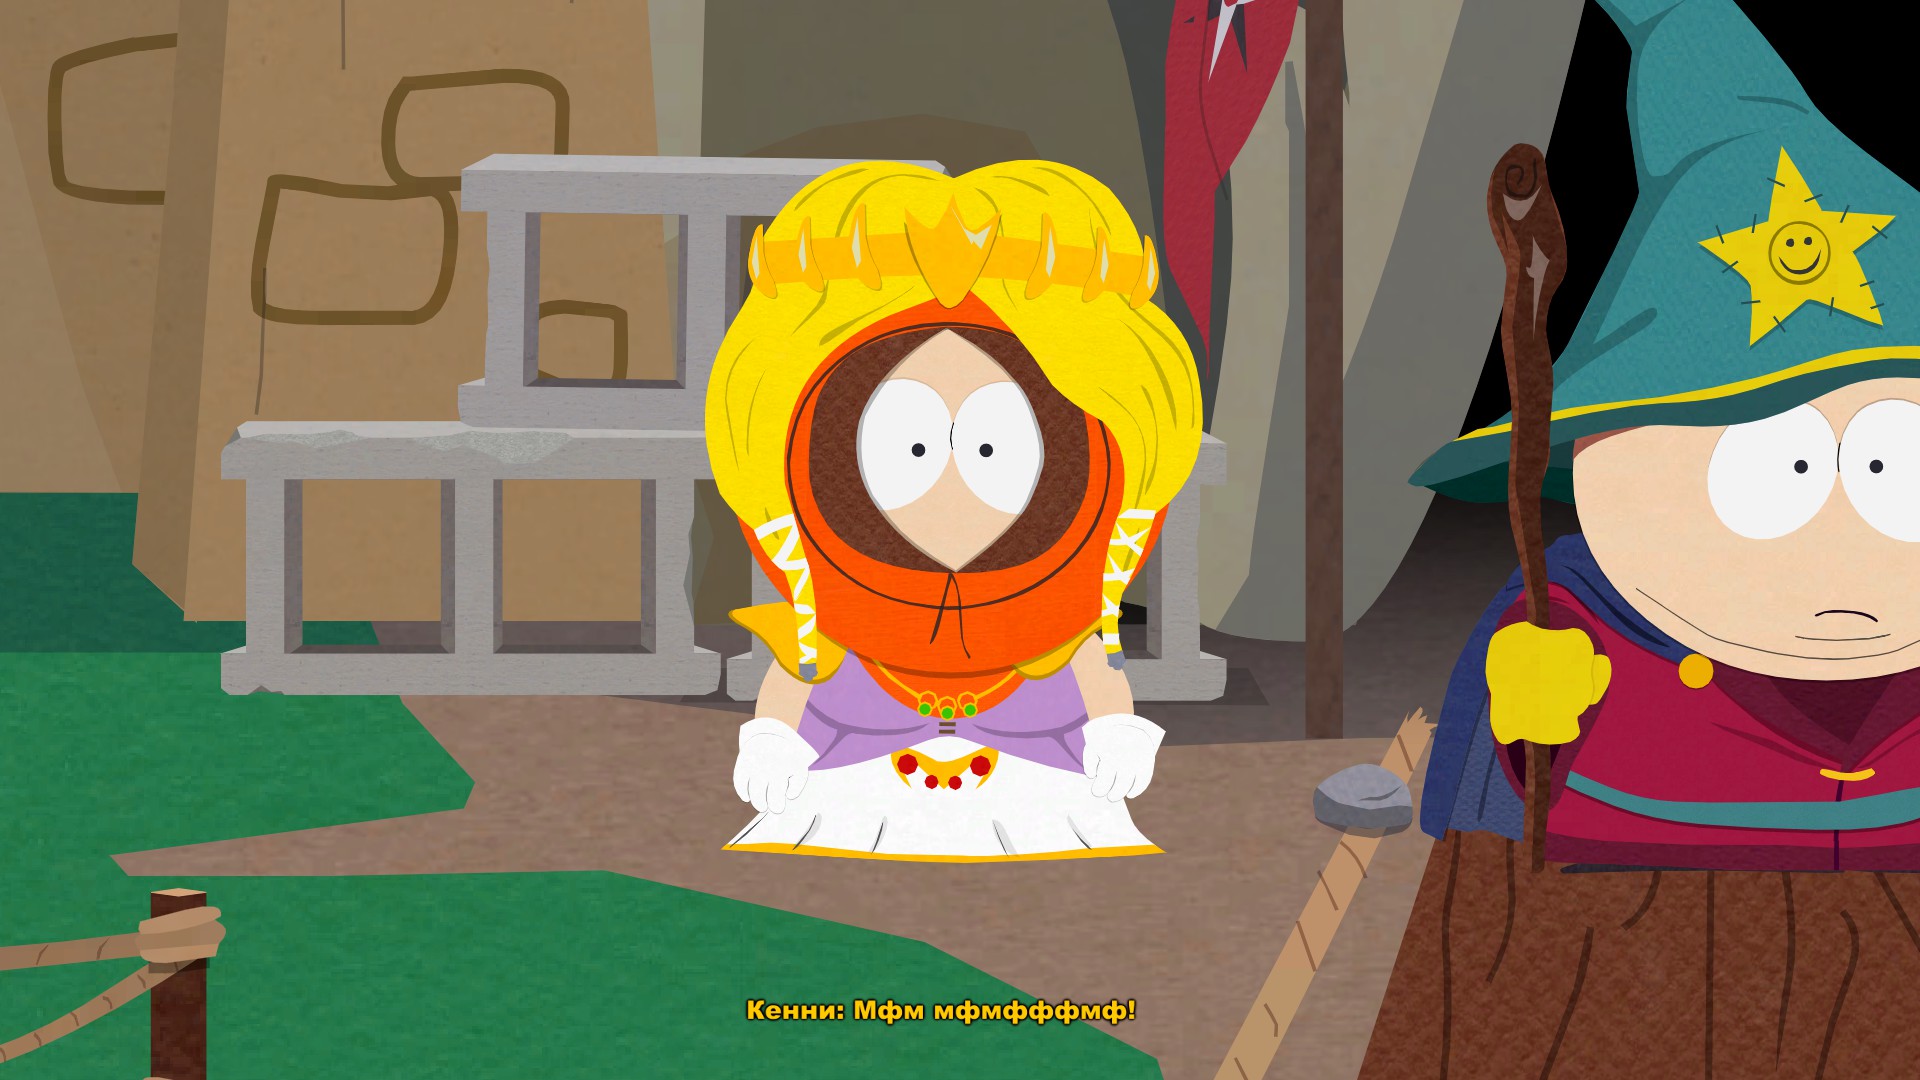 South Park: The Stick of Truth.